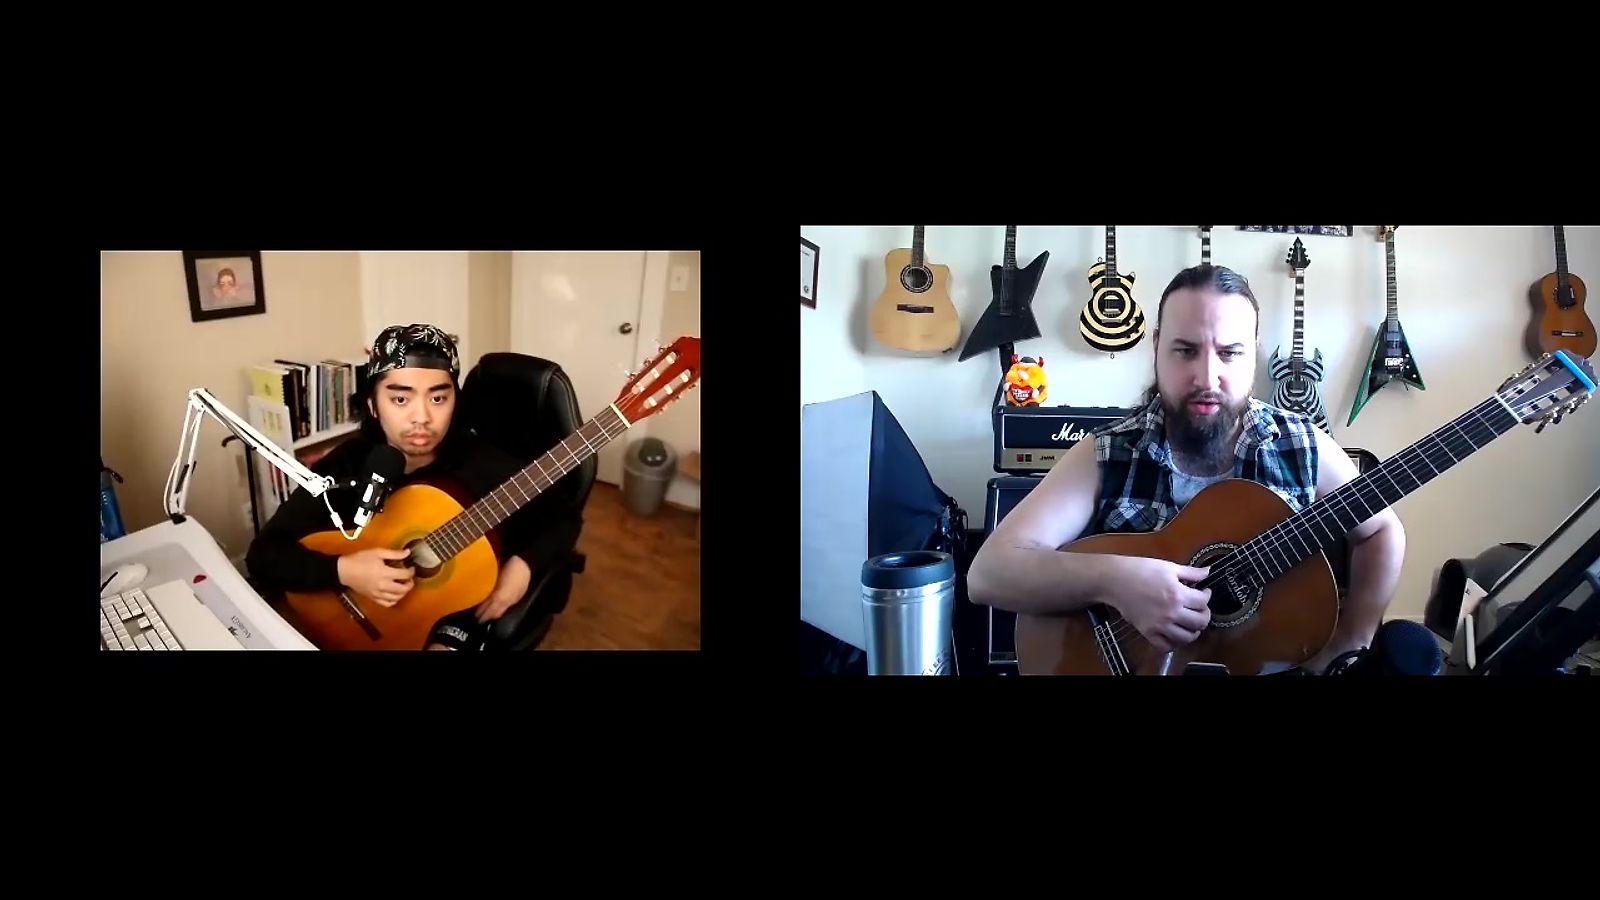 Online Classical Guitar Video Examples